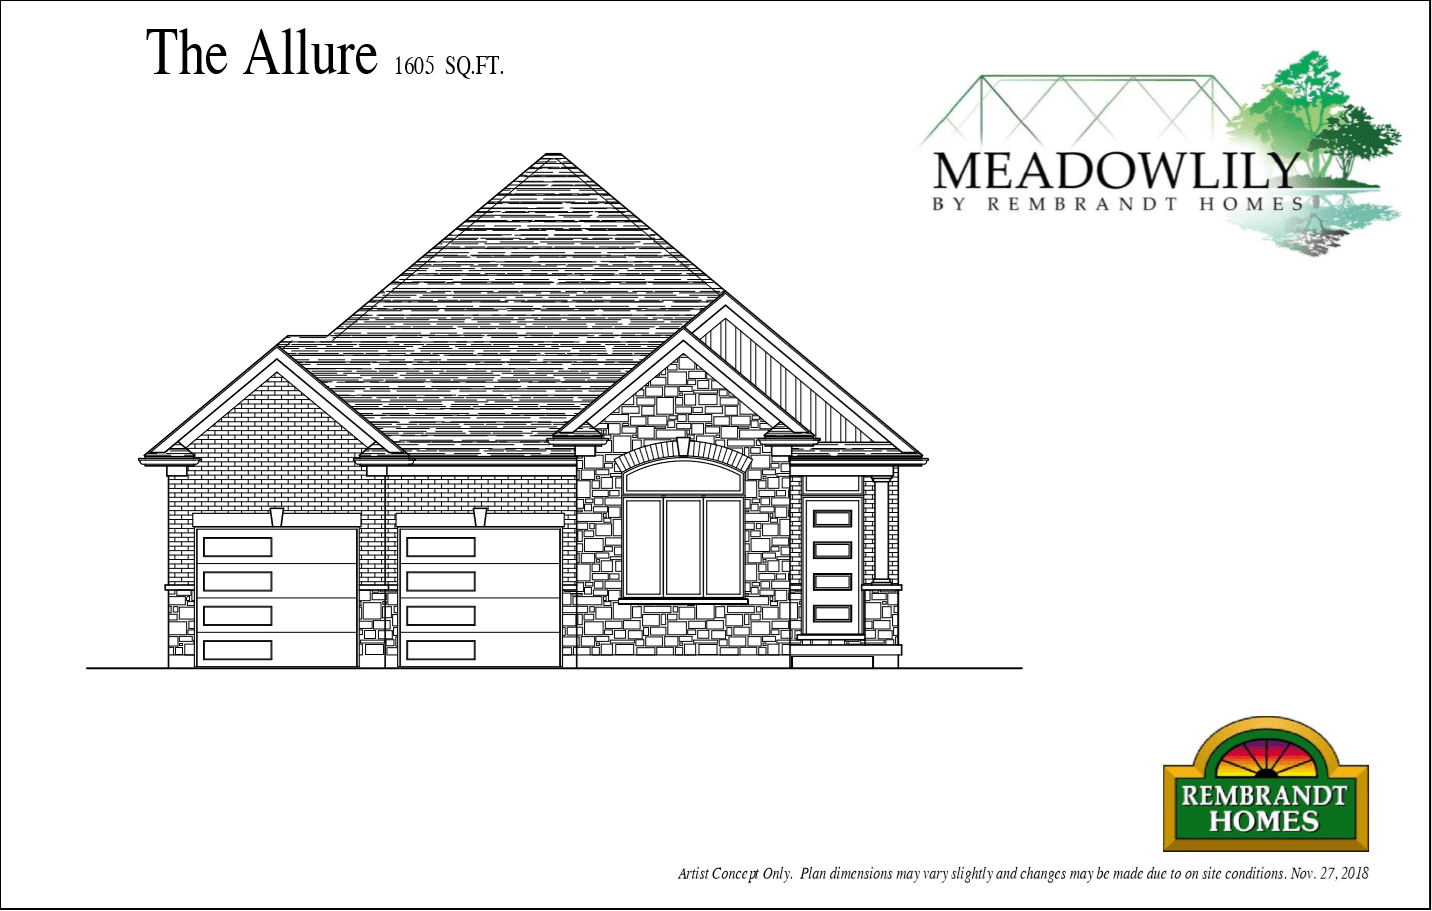 The Allure - Meadowlily Plans